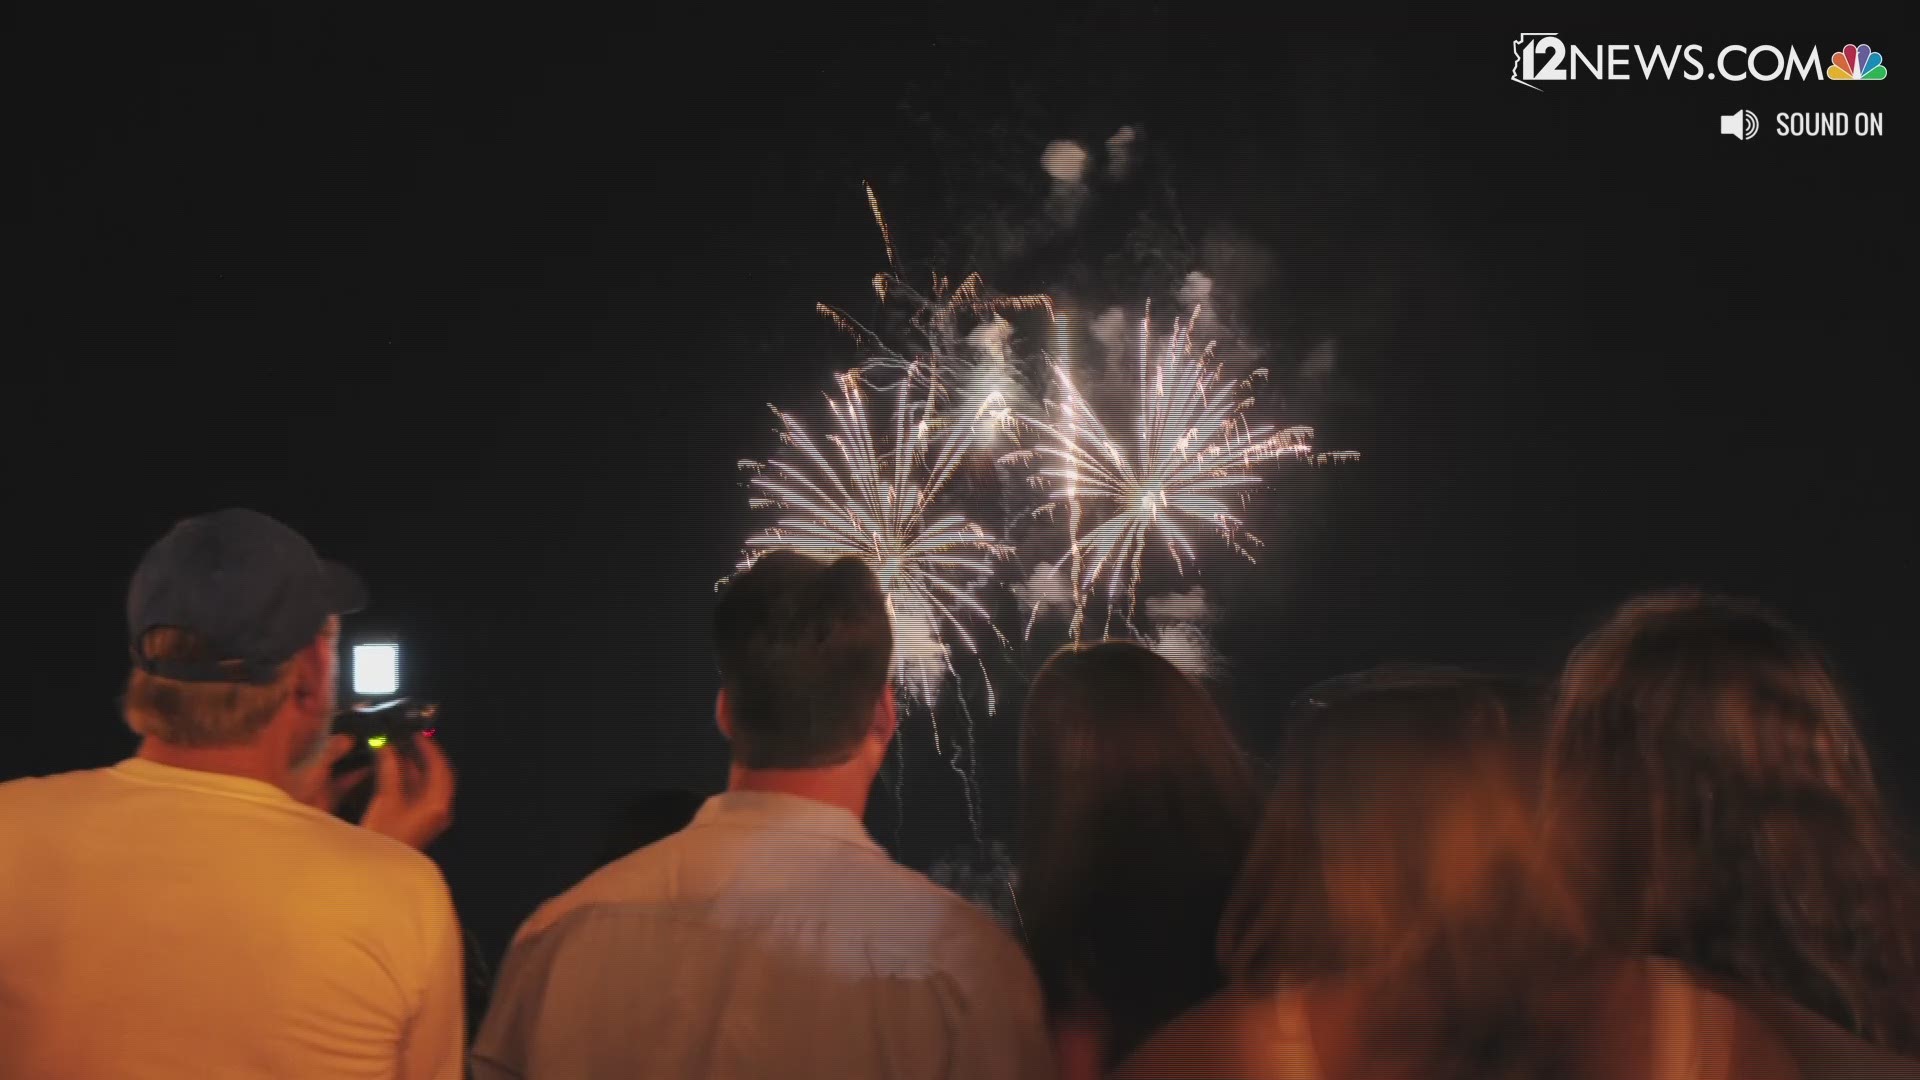 Capture the perfect Instagramable photo or video of 4th of July fireworks with just your smartphone. Here's how!